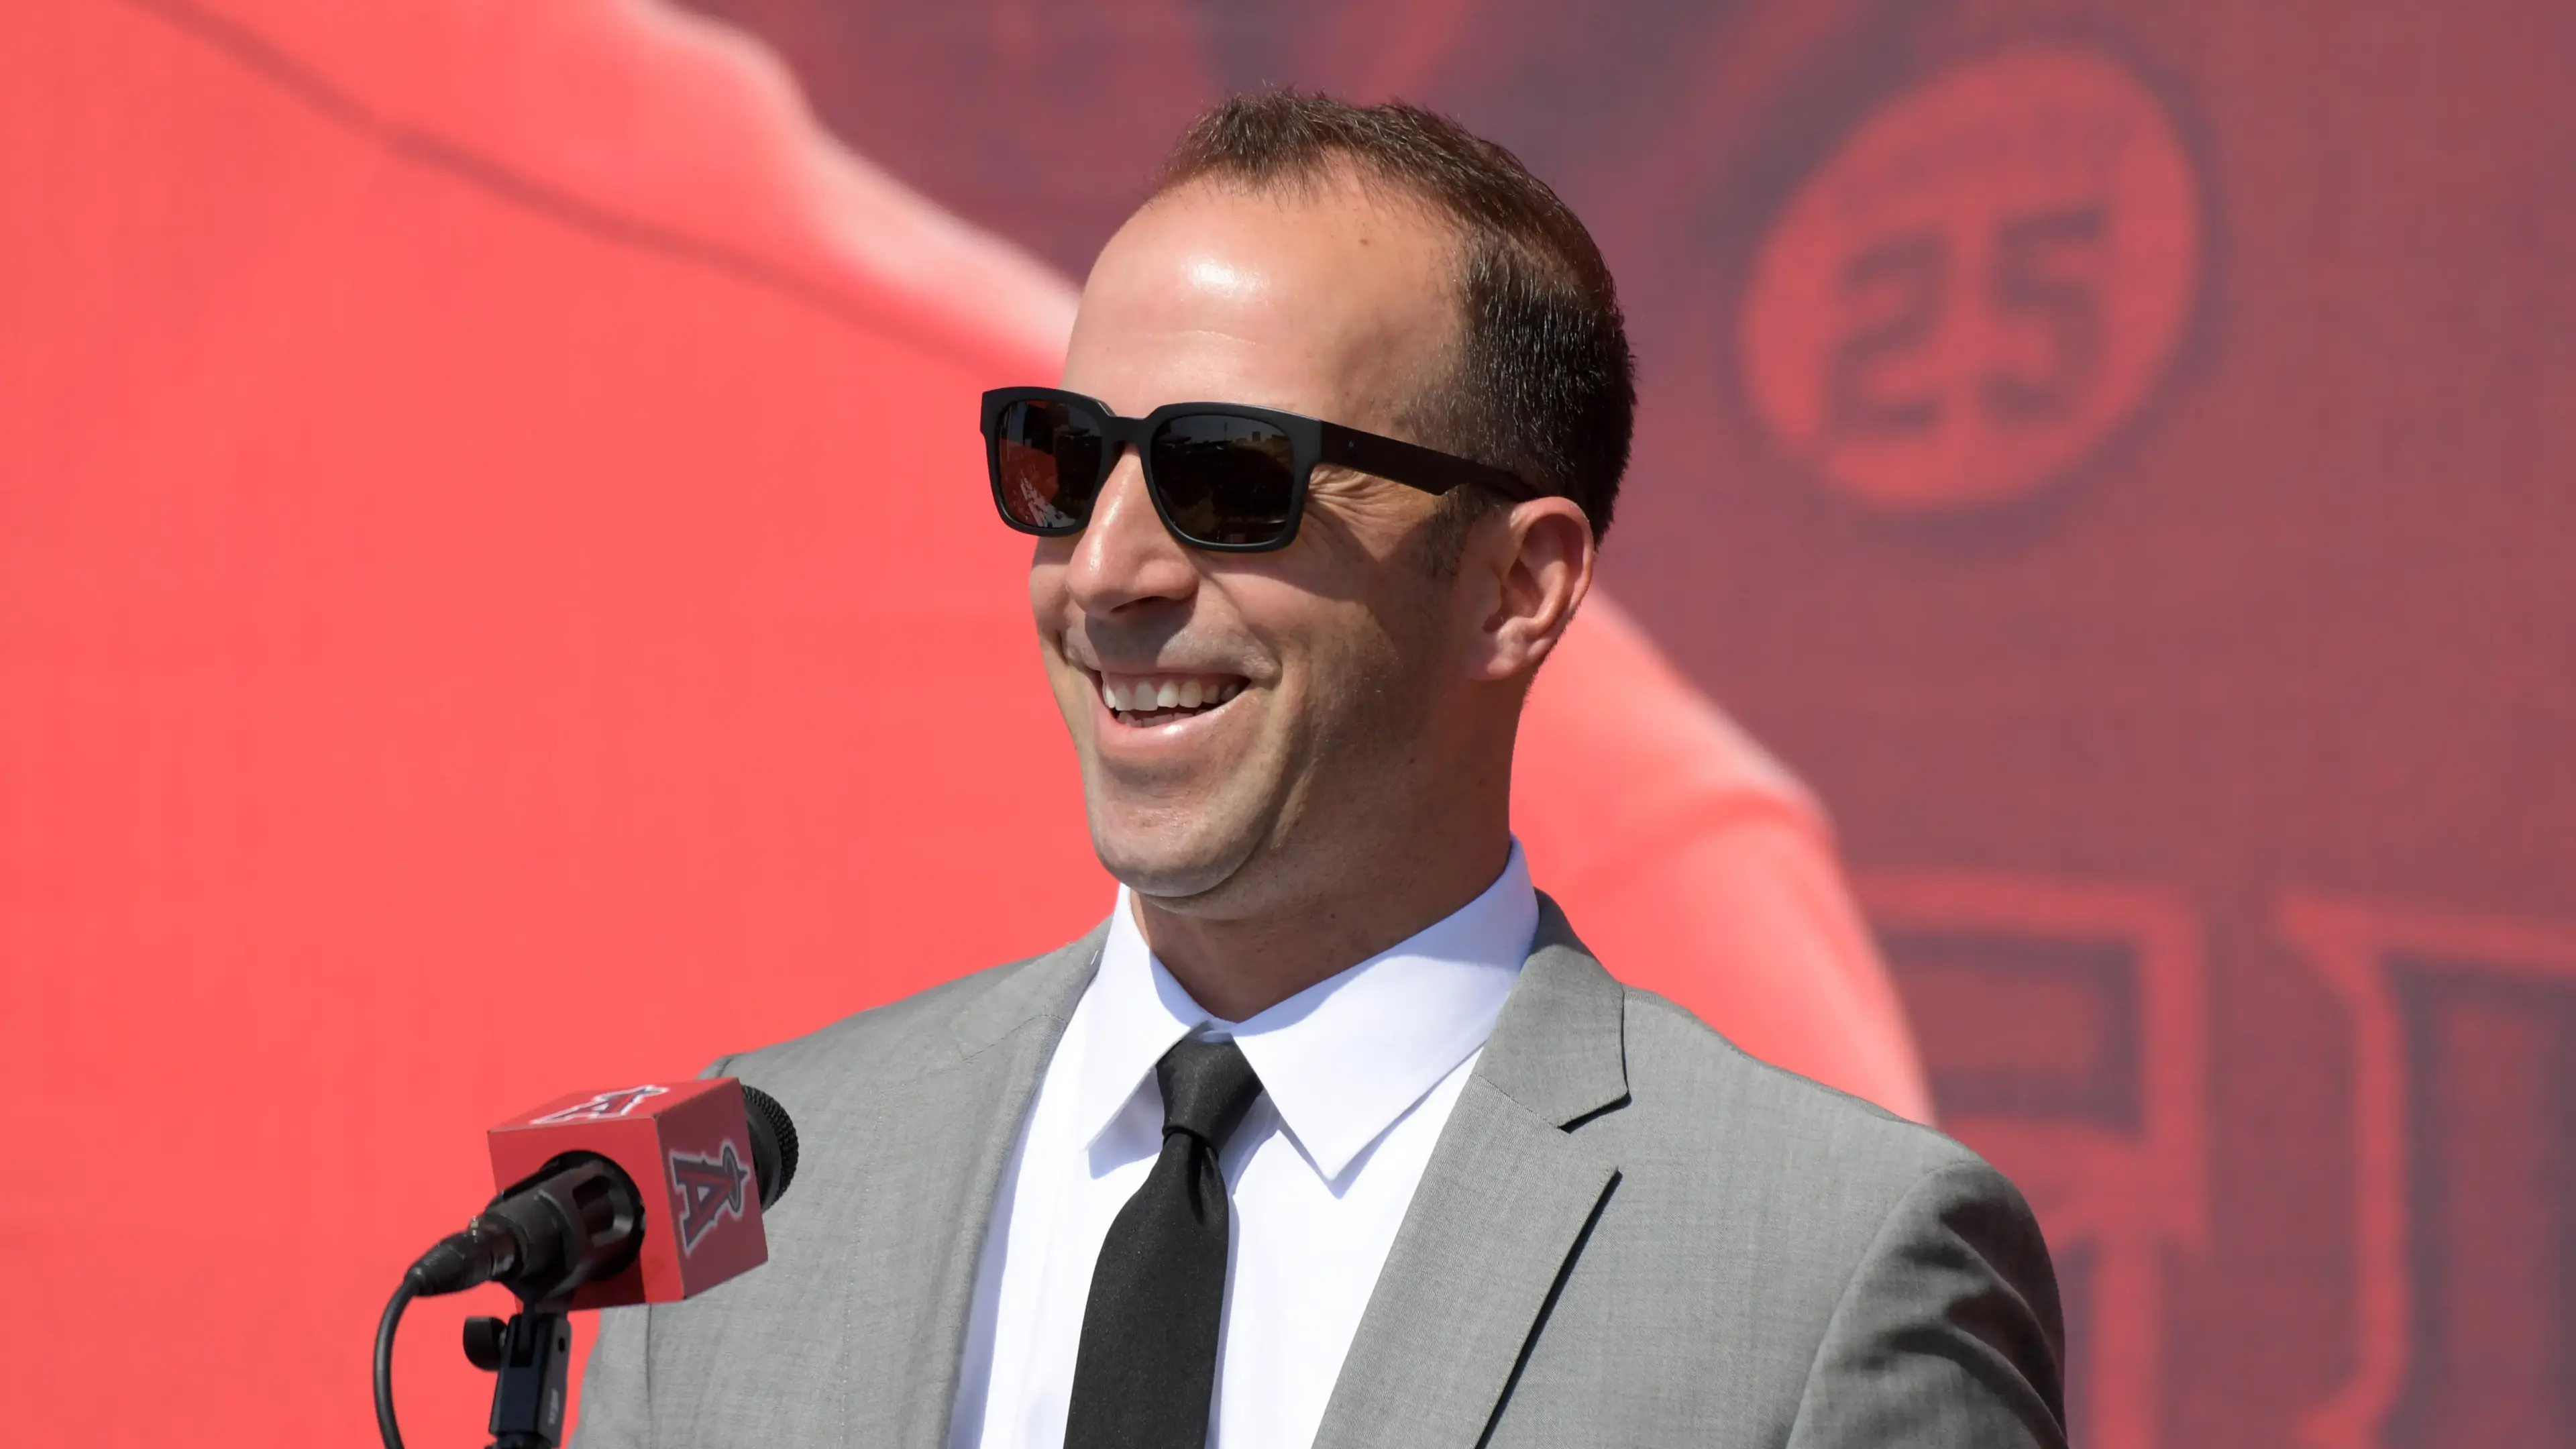 Los Angeles Angels general manager Billy Eppler at a press conference to announce a 12 year contract extension for center fielder Mike Trout (not pictured) at Angel Stadium of Anaheim. / Kirby Lee-USA TODAY Sports